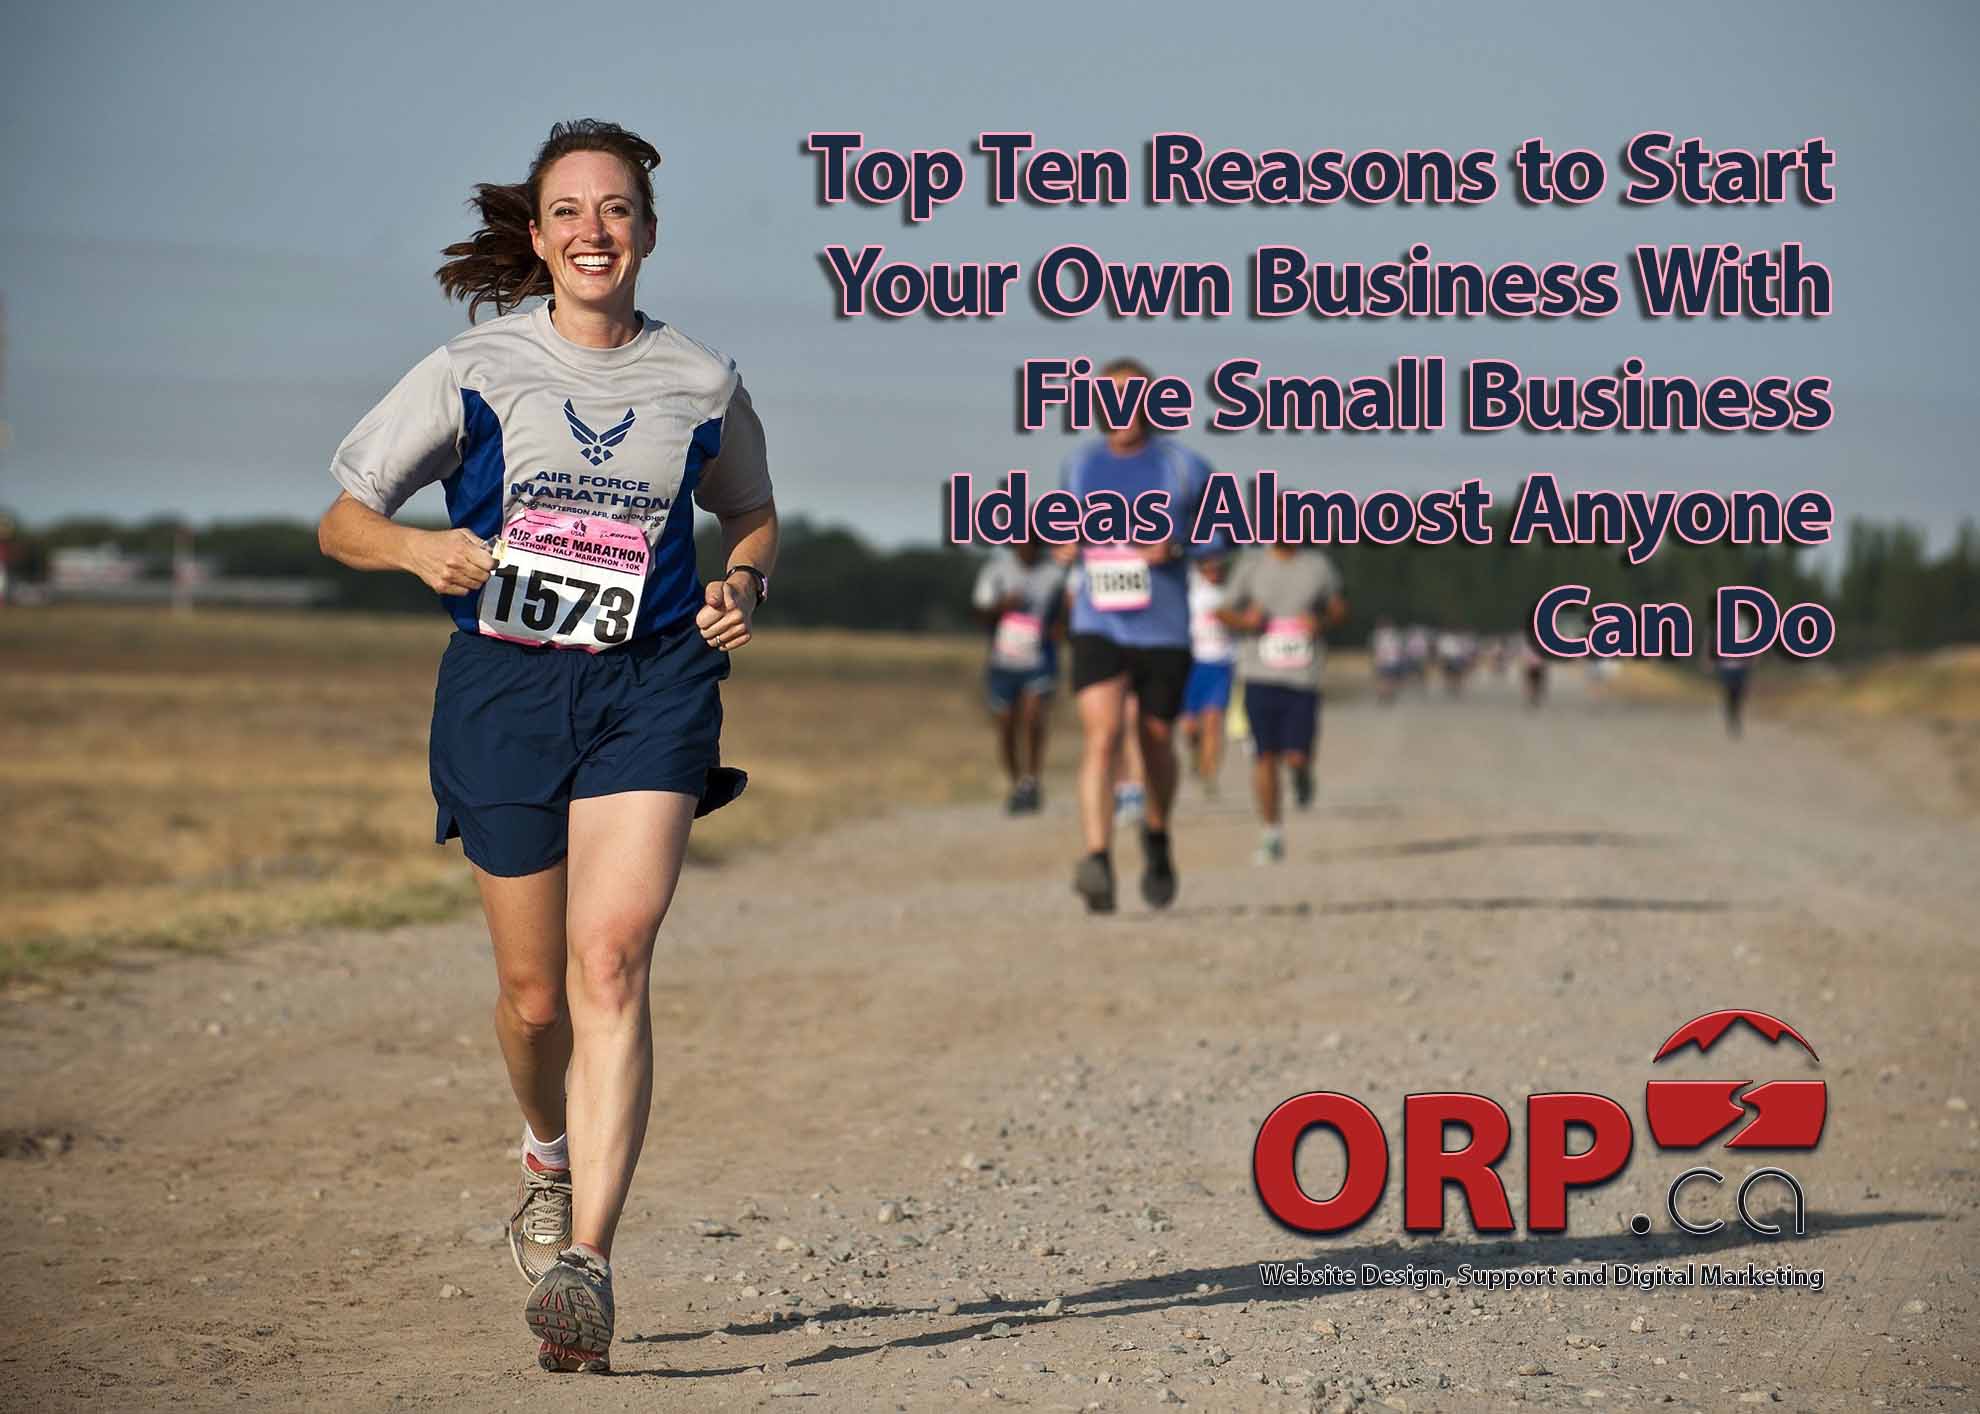  Top Ten Reasons to Start Your Own Business With Five Small Business Ideas Almost Anyone Can Do by ORP.ca Digital Marketing and Website Services for Business Professionals